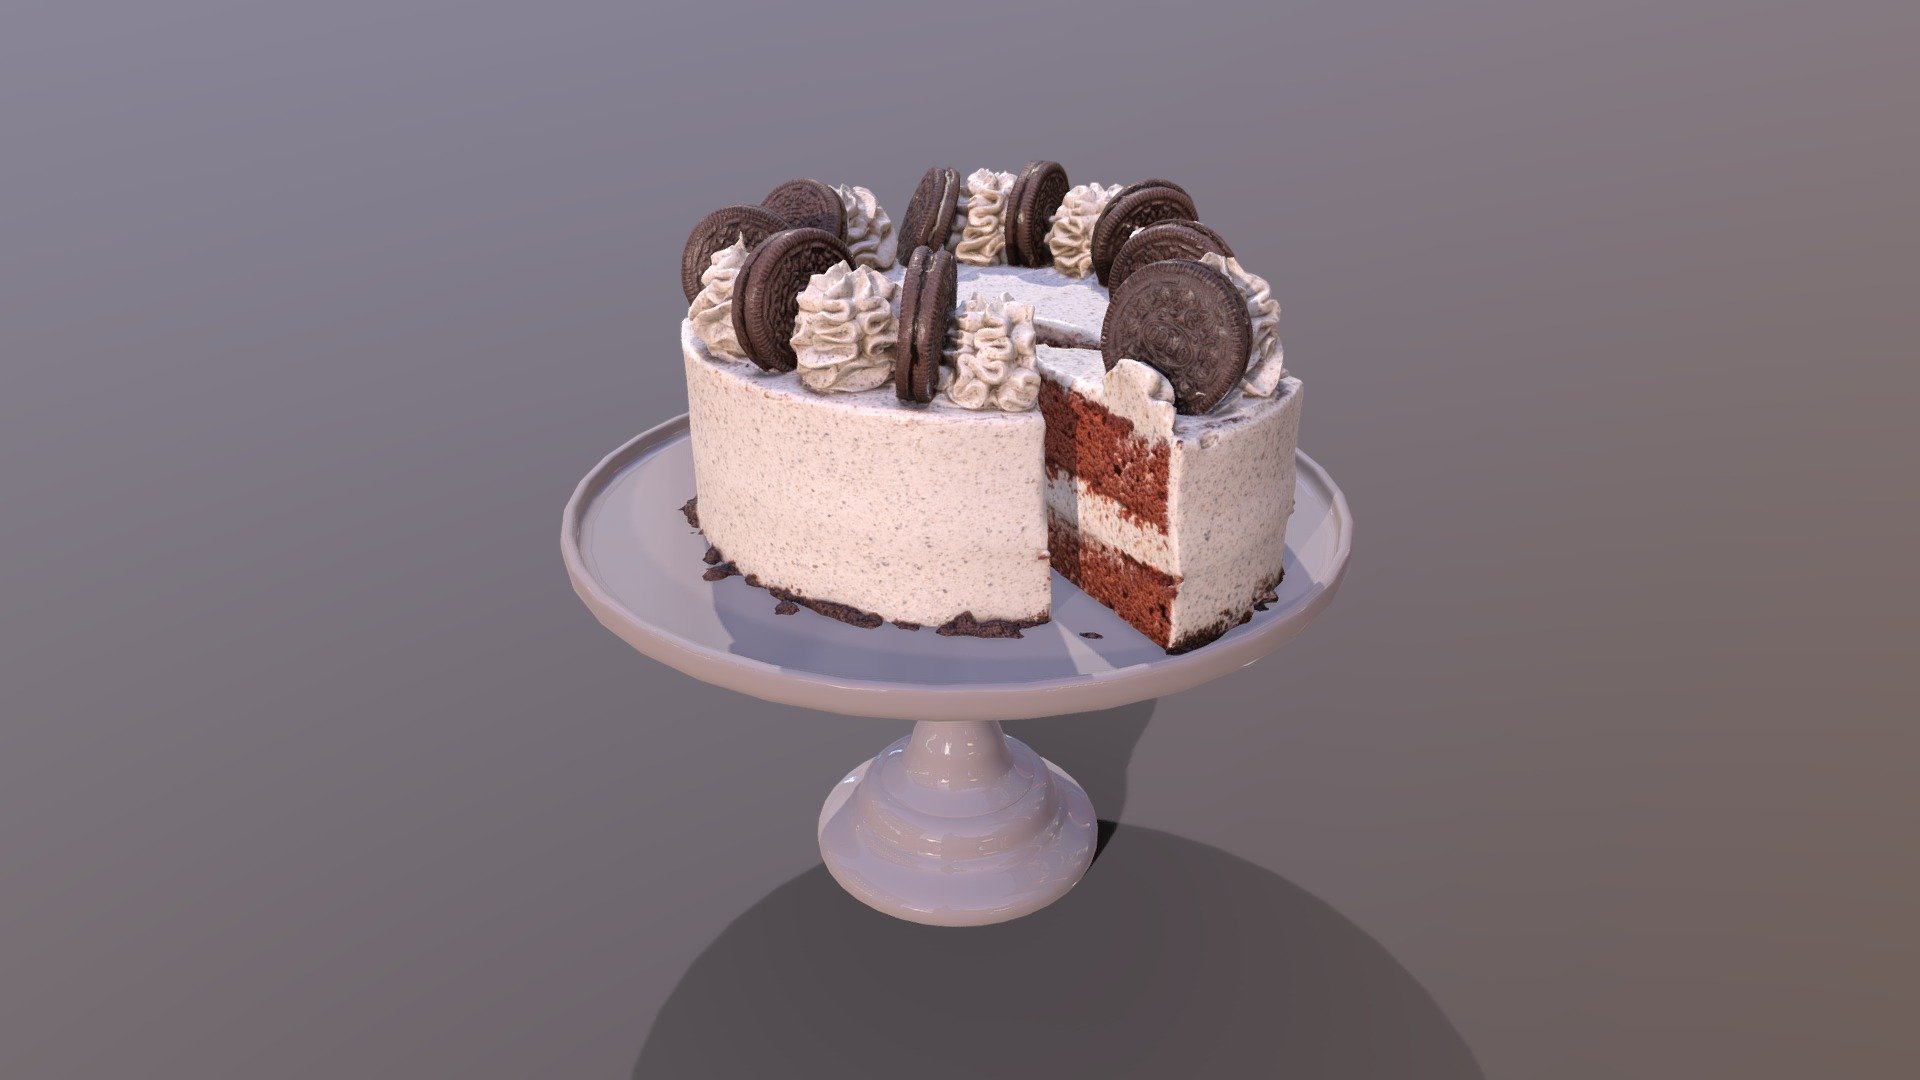 This premium Oreo Cookie Cake was created using photogrammetry which is made by CAKESBURG Premium Cake Shop in the UK. You can purchase real cake from this link: https://cakesburg.co.uk/collections/classic-cakes/products/cookies-and-cream-cake

Cut Cake Textures 4096*4096px PBR photoscan-based materials (Base Color, Normal, Roughness, Specular, AO)

Slice Textures 4096*4096px PBR photoscan-based materials (Base Color, Normal, Roughness, Specular, AO)

Click here for the uncut version.

Click here for a slice of cake model.** - Sliced Oreo Cookie Cake - Buy Royalty Free 3D model by Cakesburg Premium 3D Cake Shop (@Viscom_Cakesburg) 3d model